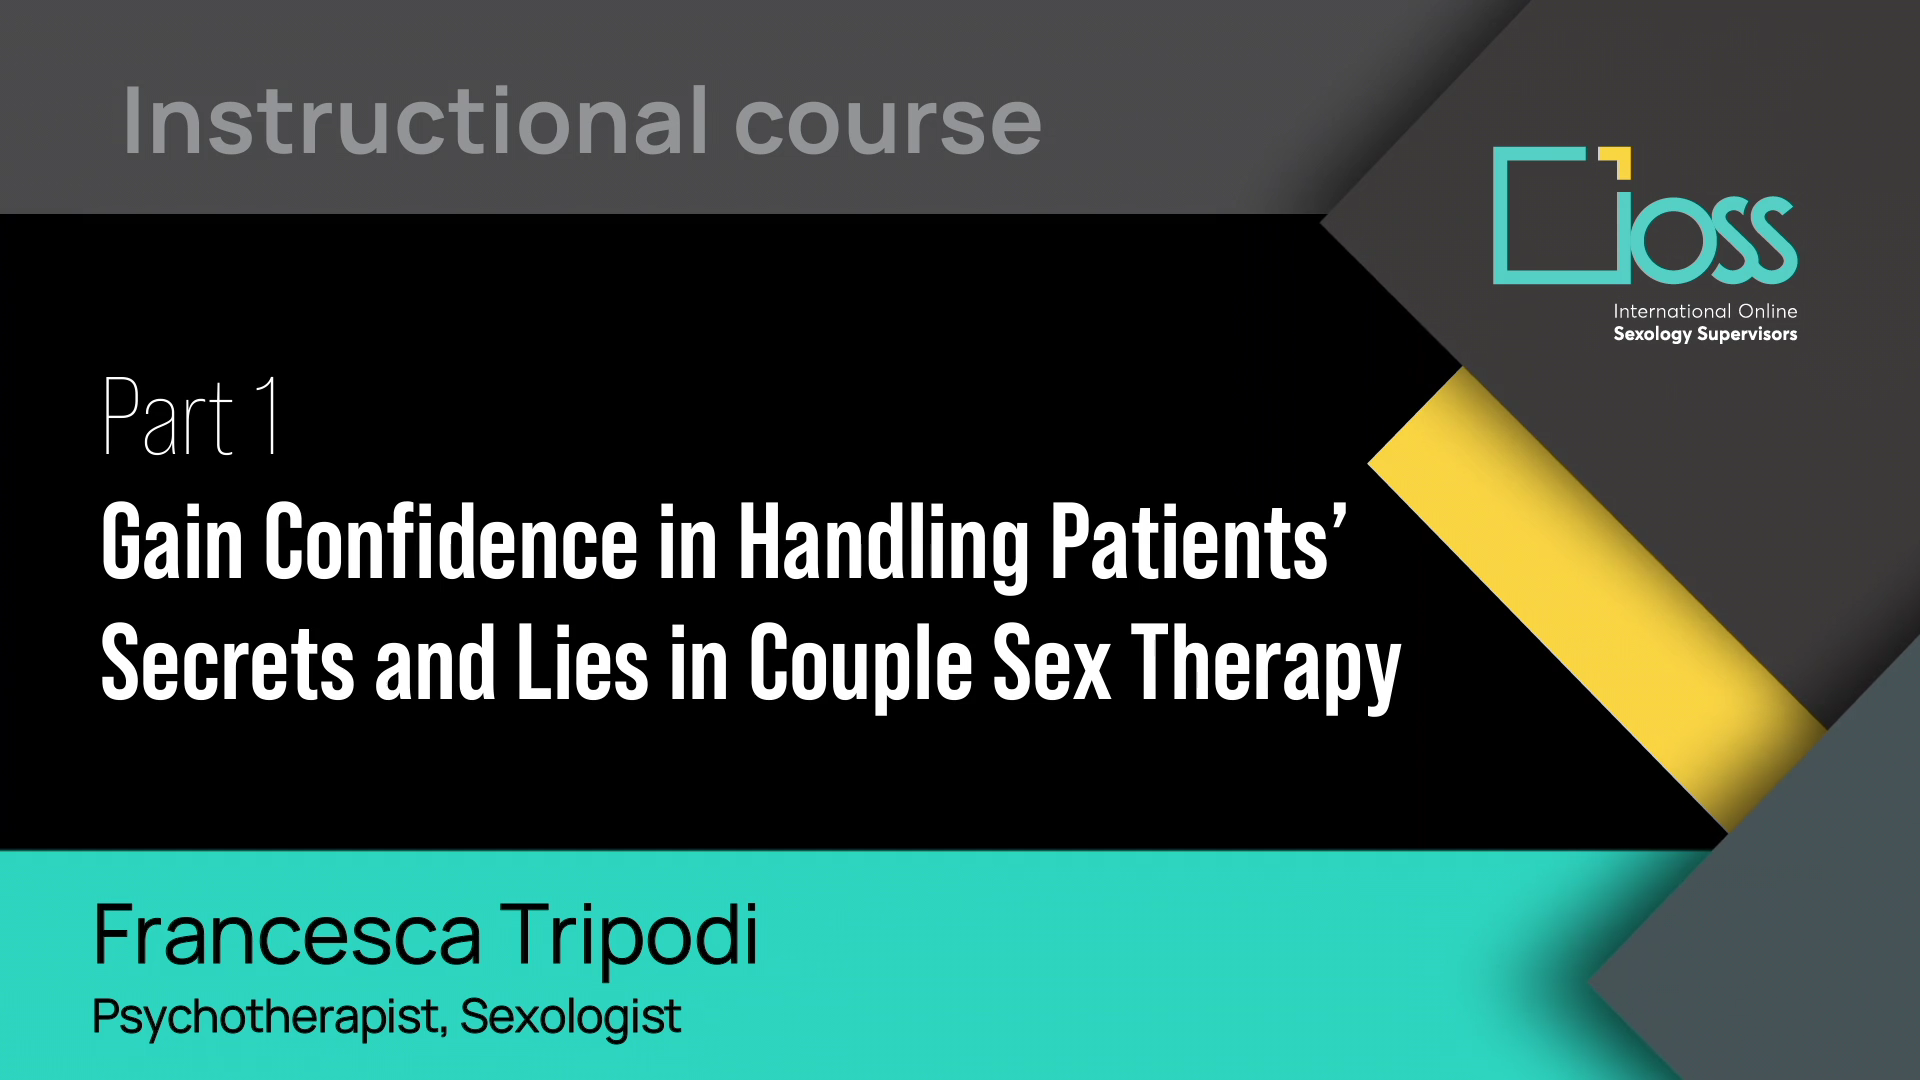 Part 1 Gain Confidence in Handling patients’ Secrets and Lies in Couple Sex Therapy (Part 1 & 2)